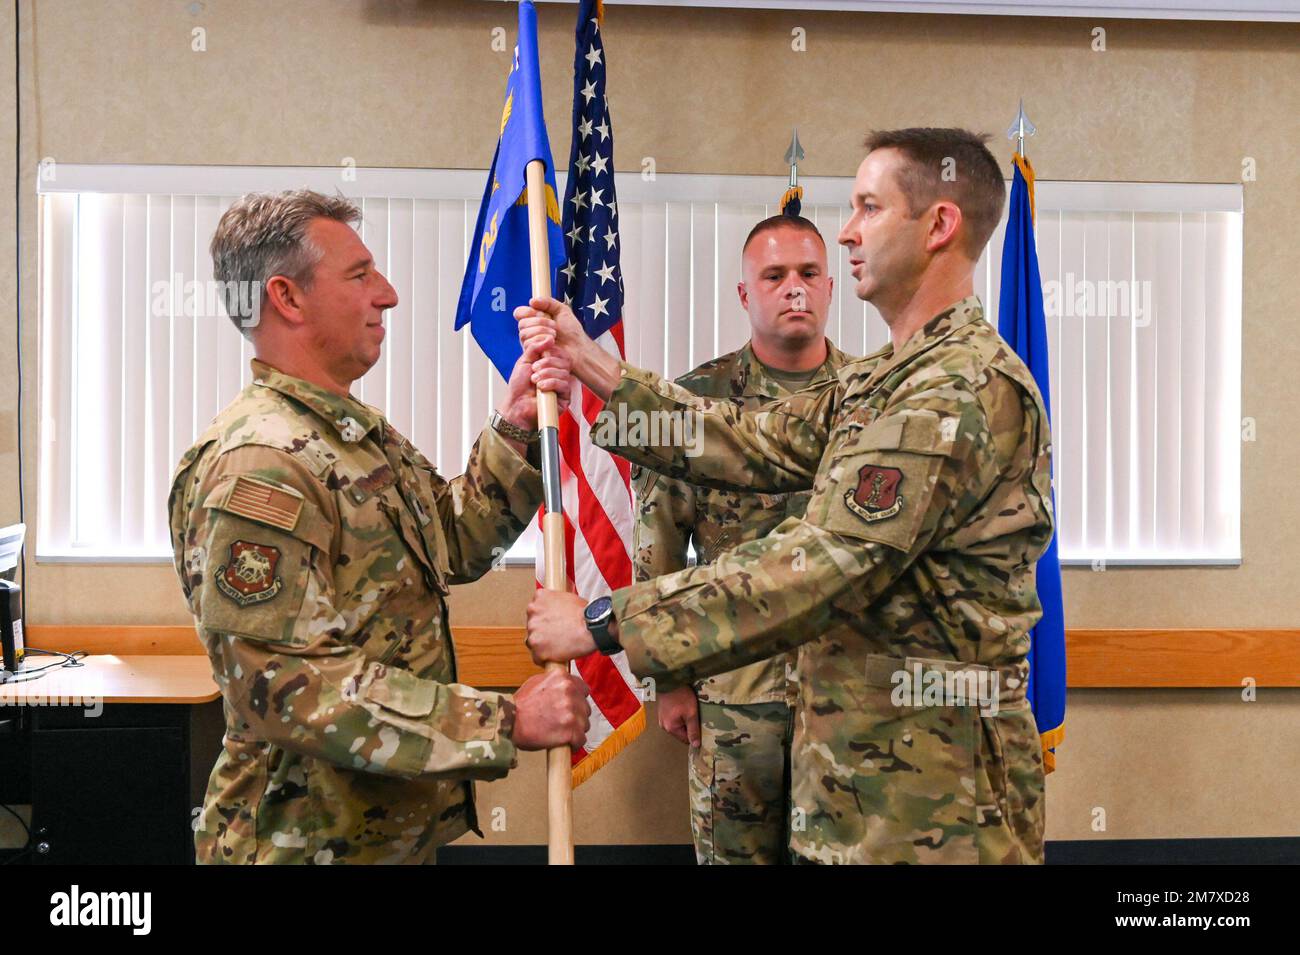 167th Operations Group deputy commander Lt. Col. John McCullough presents 167th Operations Support Squadron commander (OSS) Lt. Col. James Holsinger with the guidon during the OSS change of command ceremony held at the 167th base dining facility, Martinsburg, West Virginia, May 14, 2022. Air Force change of command ceremonies are a time-honored tradition where incoming commanders officially assume command while their airmen bear witness. Stock Photo